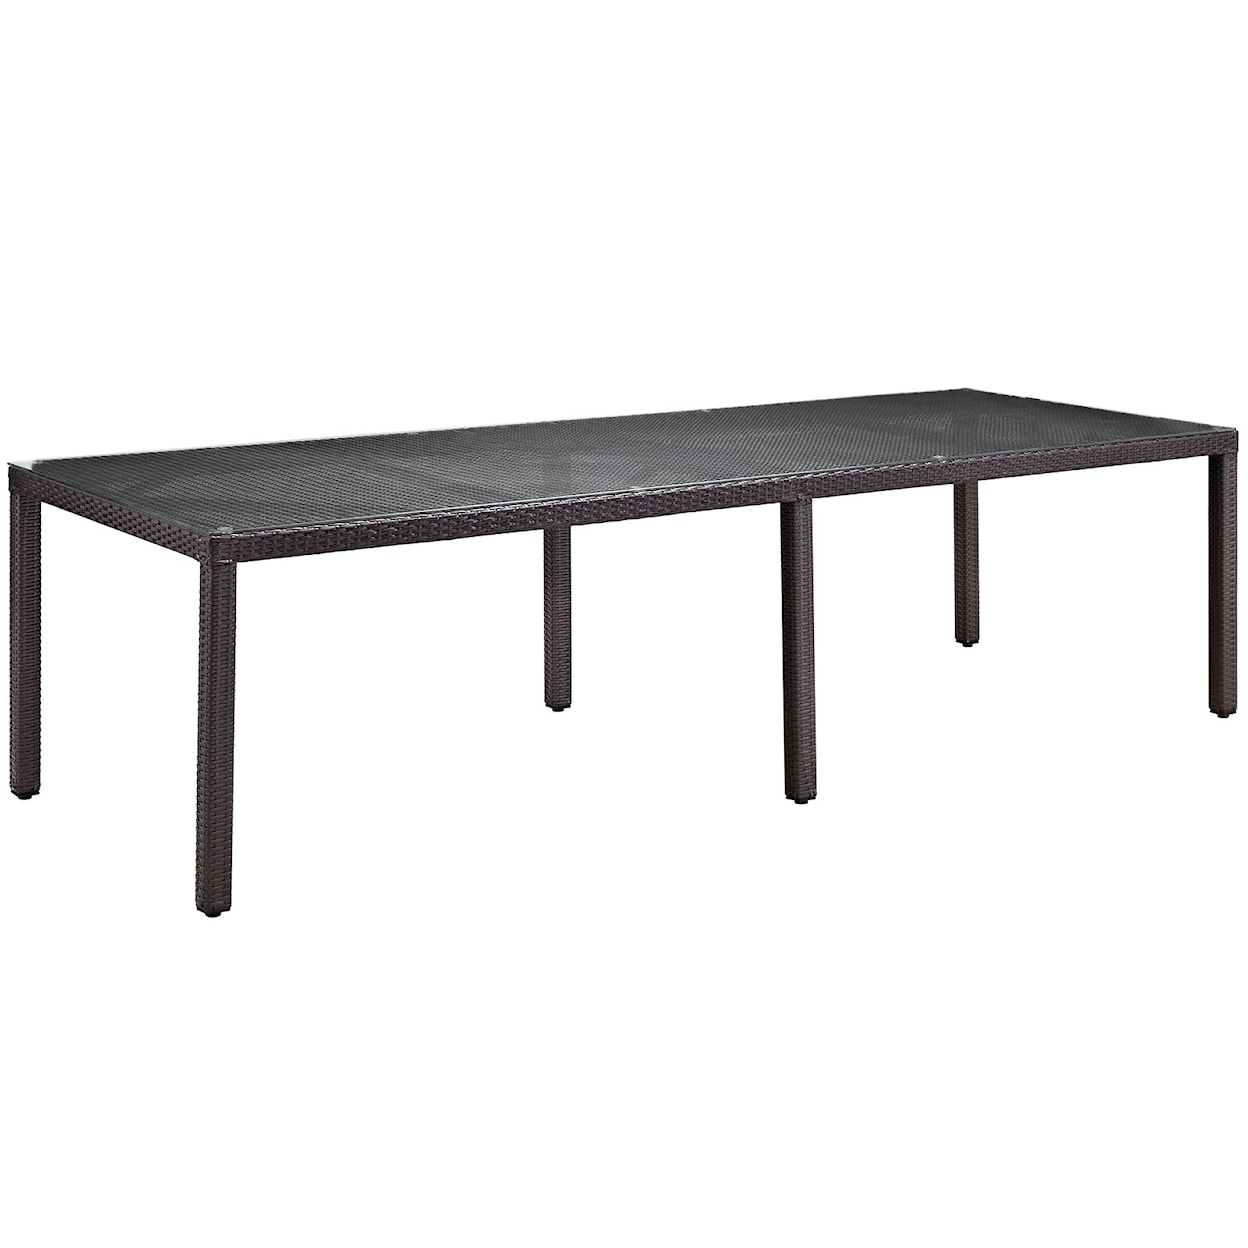 Modway Convene 114" Outdoor Dining Table